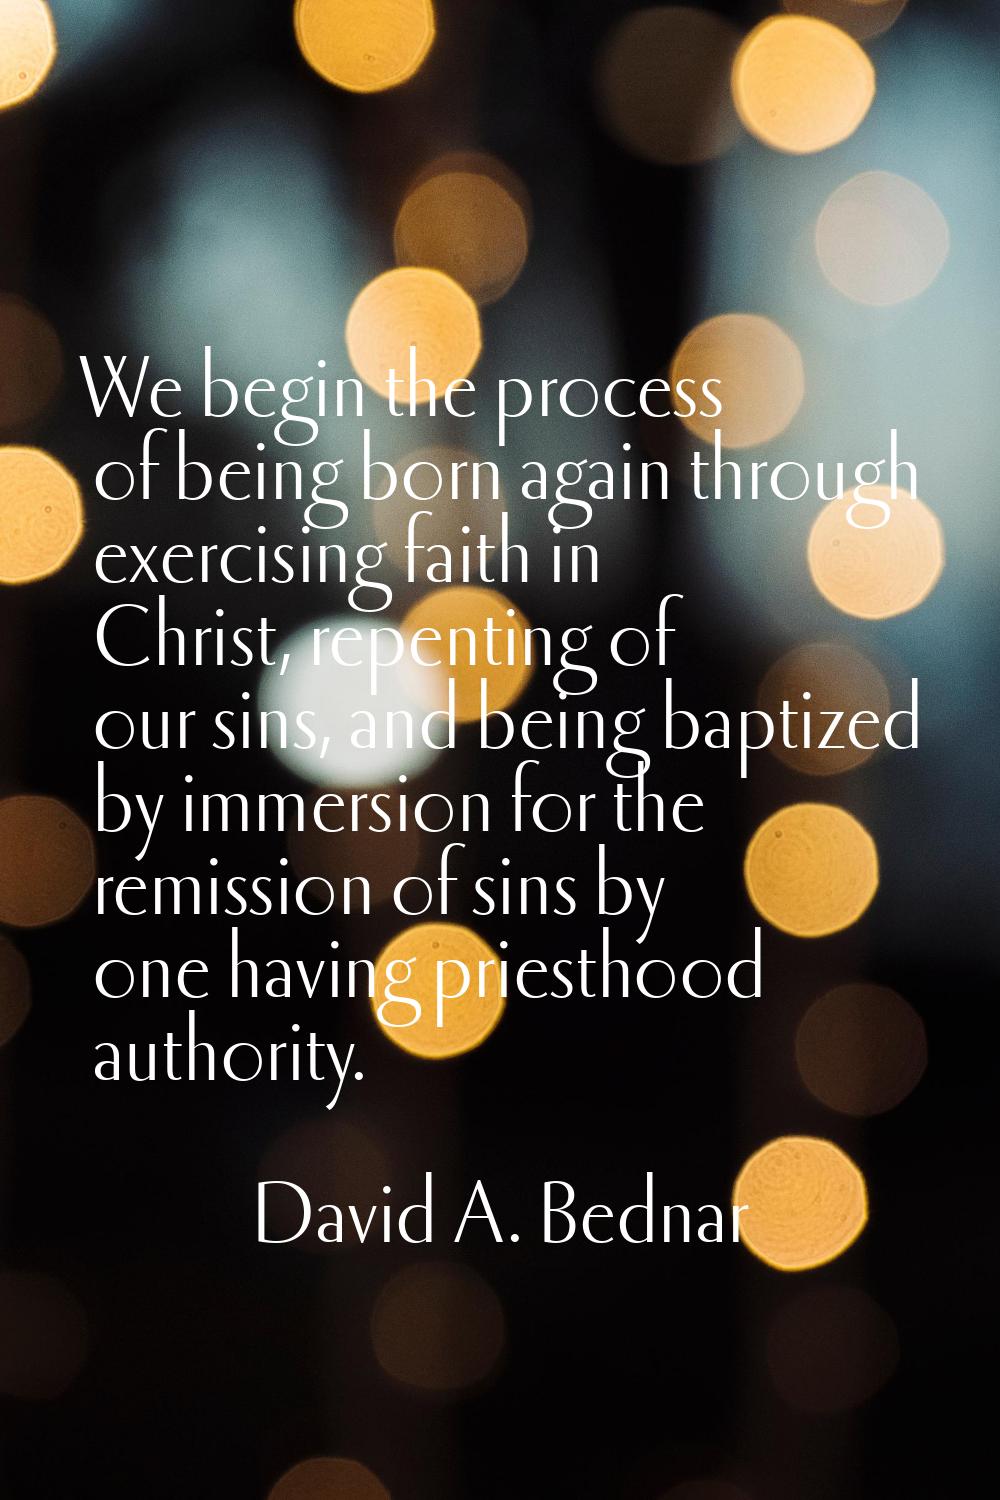 We begin the process of being born again through exercising faith in Christ, repenting of our sins,